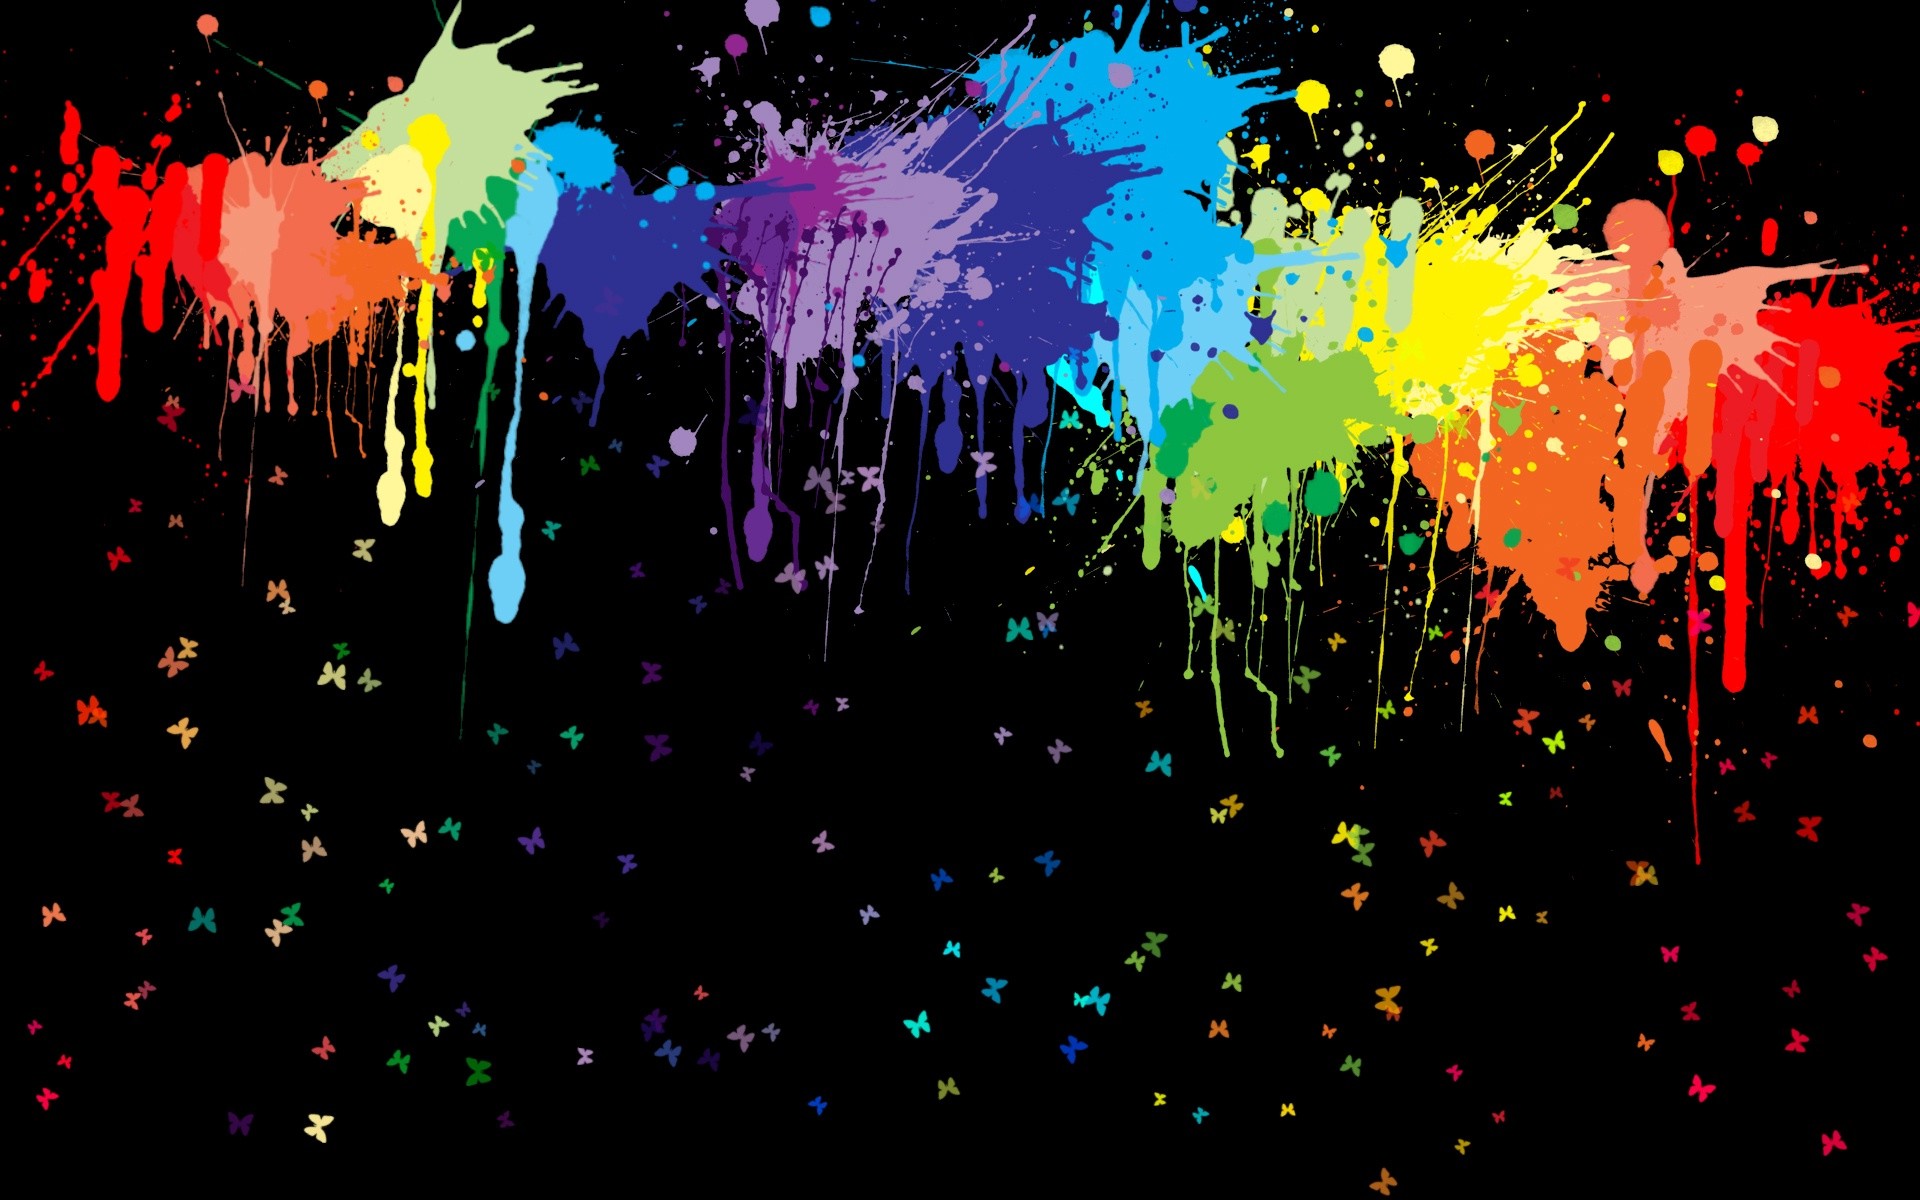 Paint Splashes Vector Background Designs Full HD Wallpaper Points